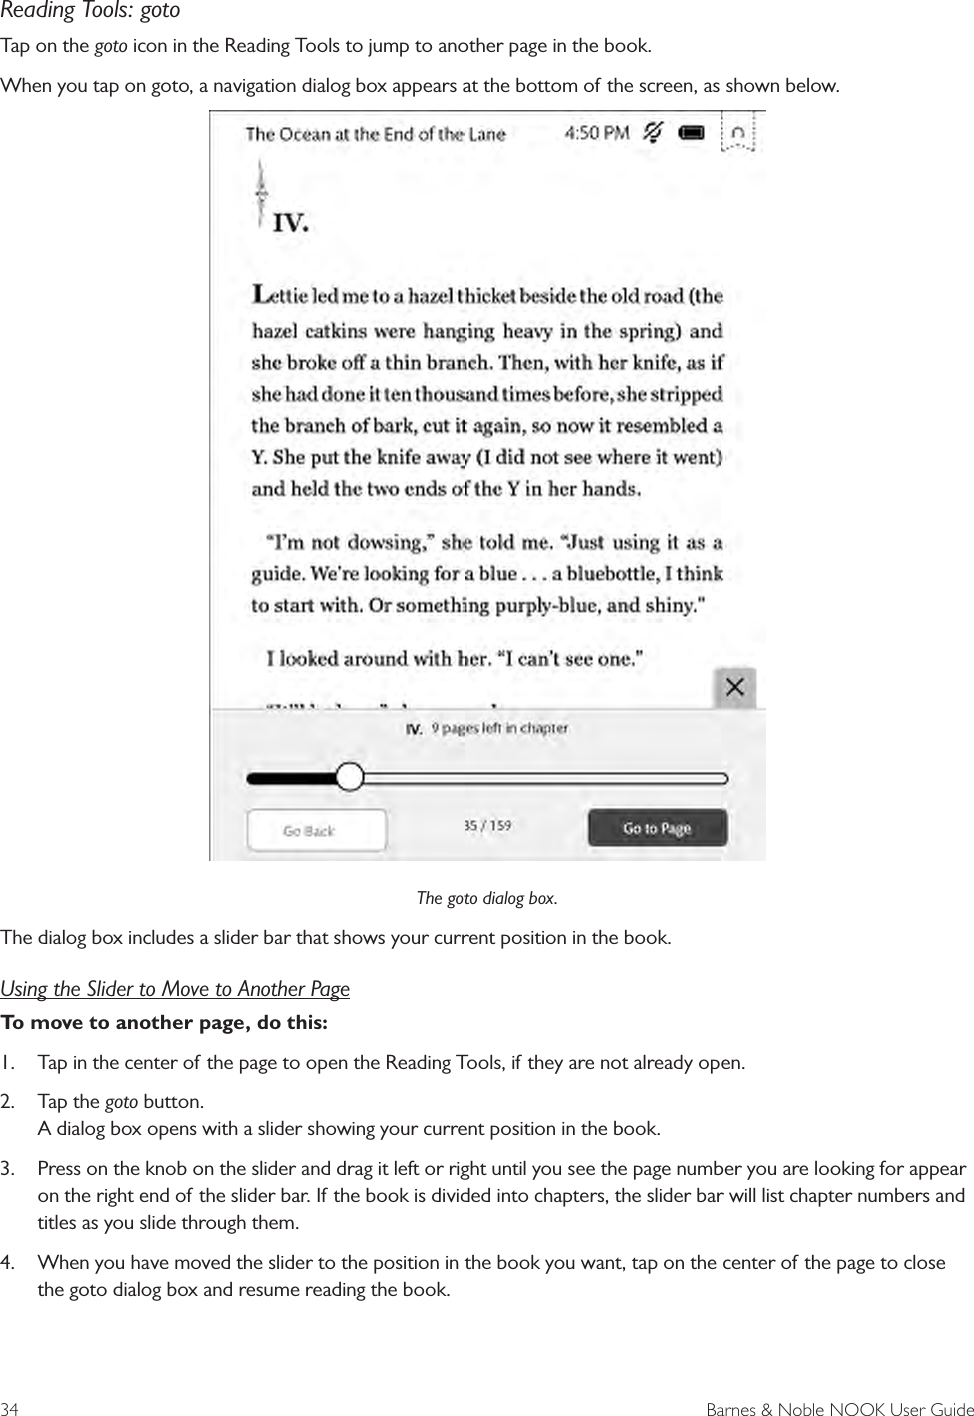 34  Barnes &amp; Noble NOOK User GuideReading Tools: gotoTap on the goto icon in the Reading Tools to jump to another page in the book.When you tap on goto, a navigation dialog box appears at the bottom of the screen, as shown below.The goto dialog box.The dialog box includes a slider bar that shows your current position in the book. Using the Slider to Move to Another PageTo move to another page, do this:1.  Tap in the center of the page to open the Reading Tools, if they are not already open.2.  Tap the goto button. A dialog box opens with a slider showing your current position in the book.3.  Press on the knob on the slider and drag it left or right until you see the page number you are looking for appear on the right end of the slider bar. If the book is divided into chapters, the slider bar will list chapter numbers and titles as you slide through them. 4.  When you have moved the slider to the position in the book you want, tap on the center of the page to close the goto dialog box and resume reading the book.